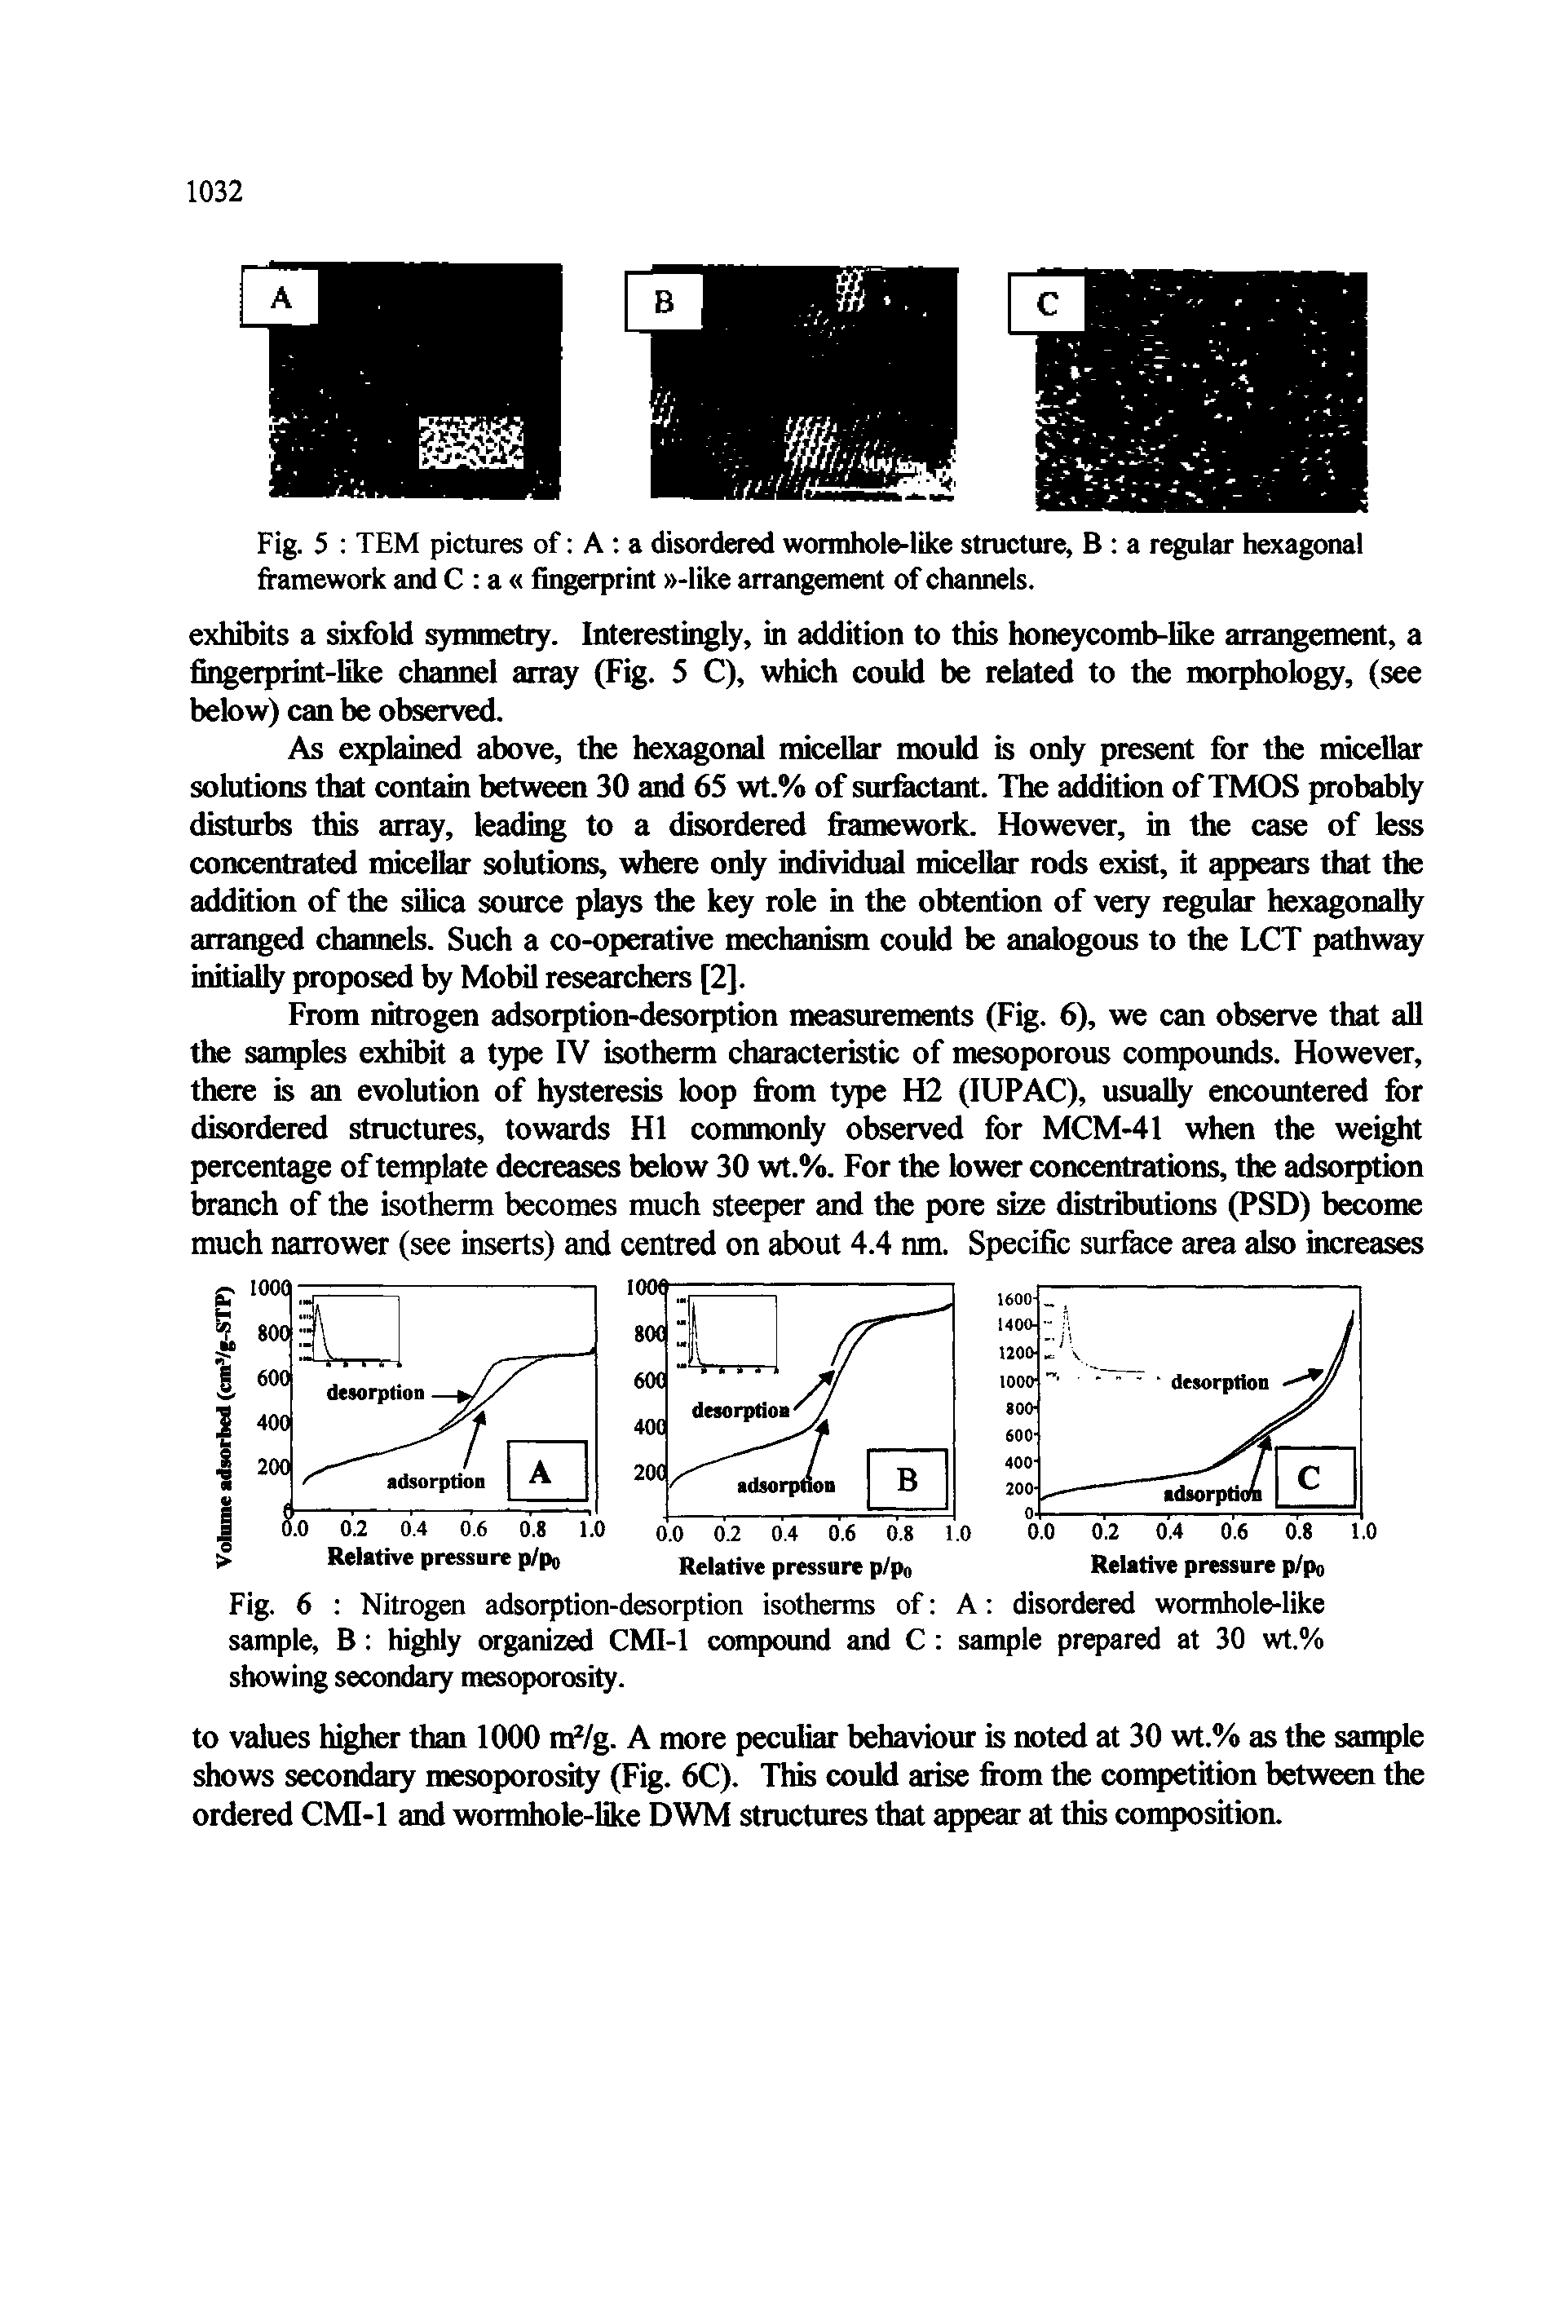 Fig. 6 Nitrogen adsorption-desorption isotherms of A disordered wormhole-like sample, B highly organized CMI-1 compound and C sample prepared at 30 wt.% showing secondary mesoporosity.